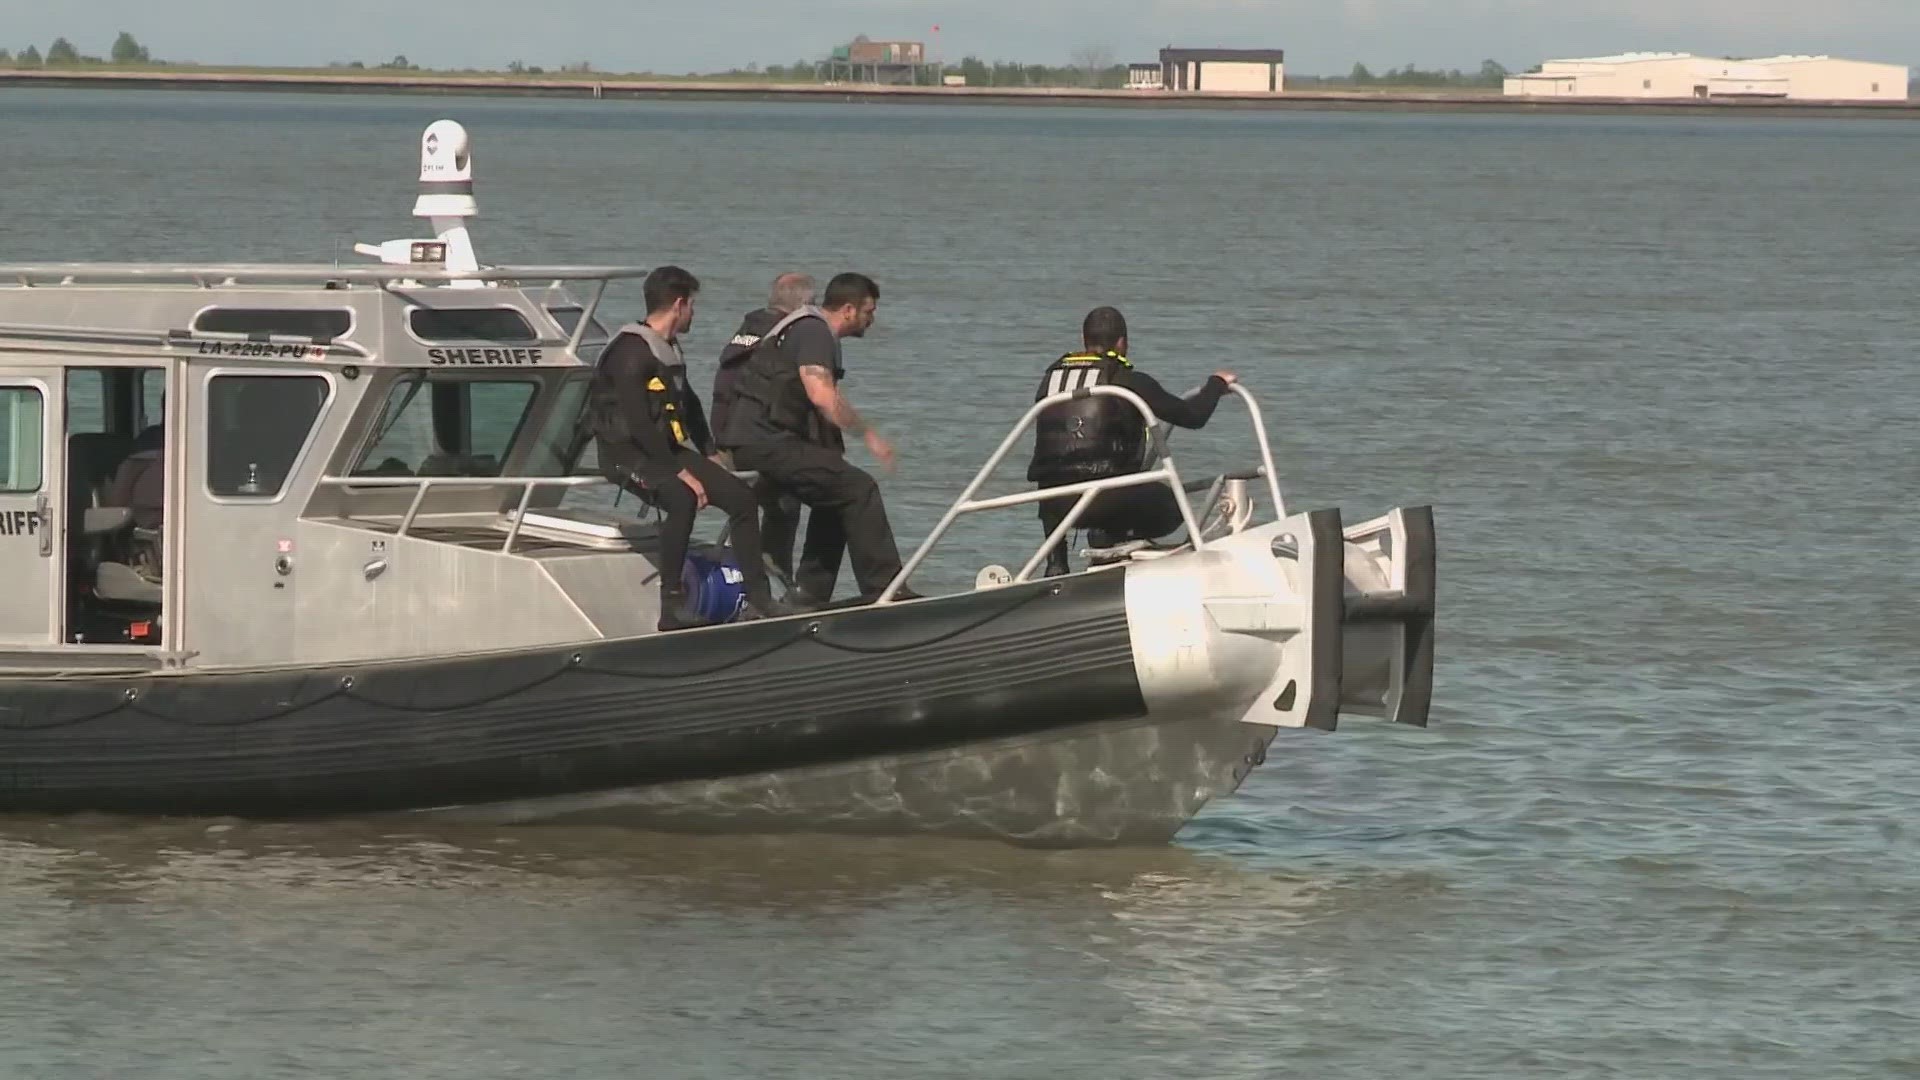 Dive teams found the pickup with a 63-year-old victim inside.